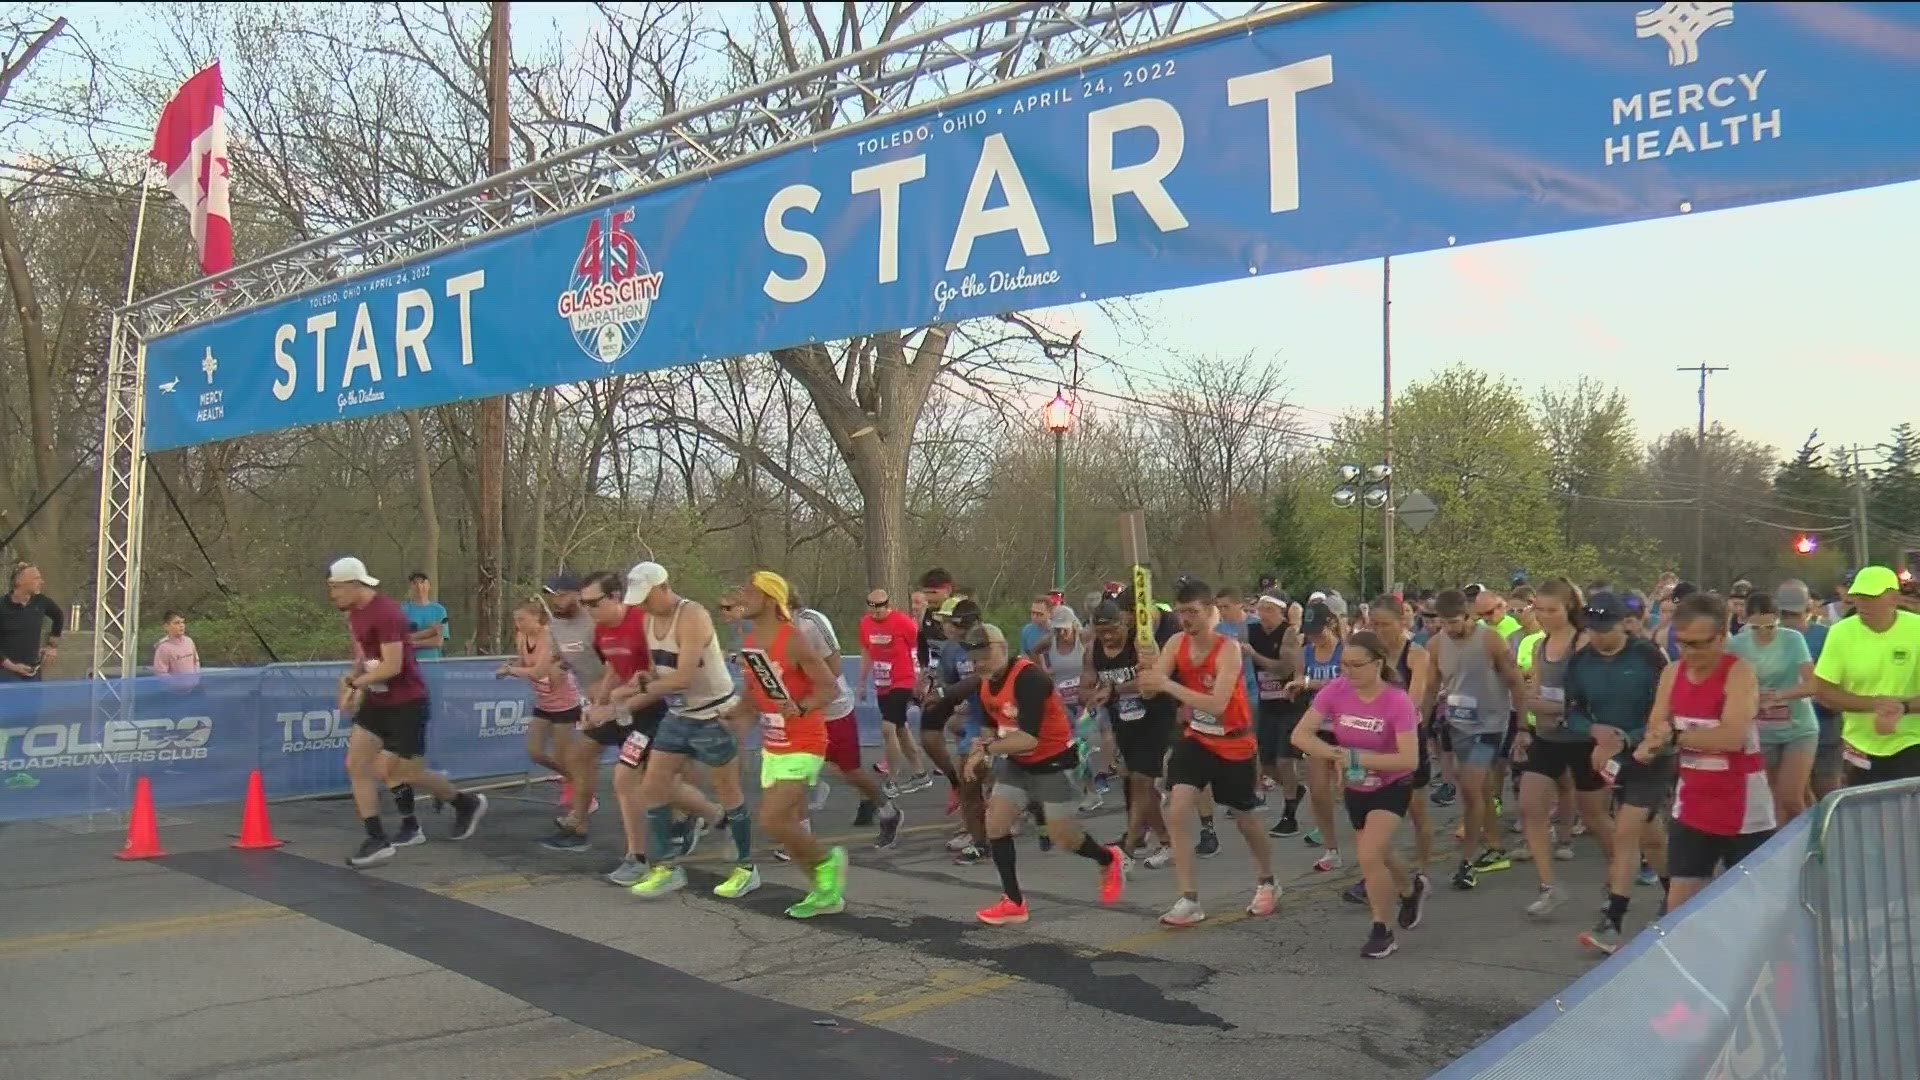 Kristy Gerlett is with event organizers as they gear up for the Glass City Marathon this weekend!